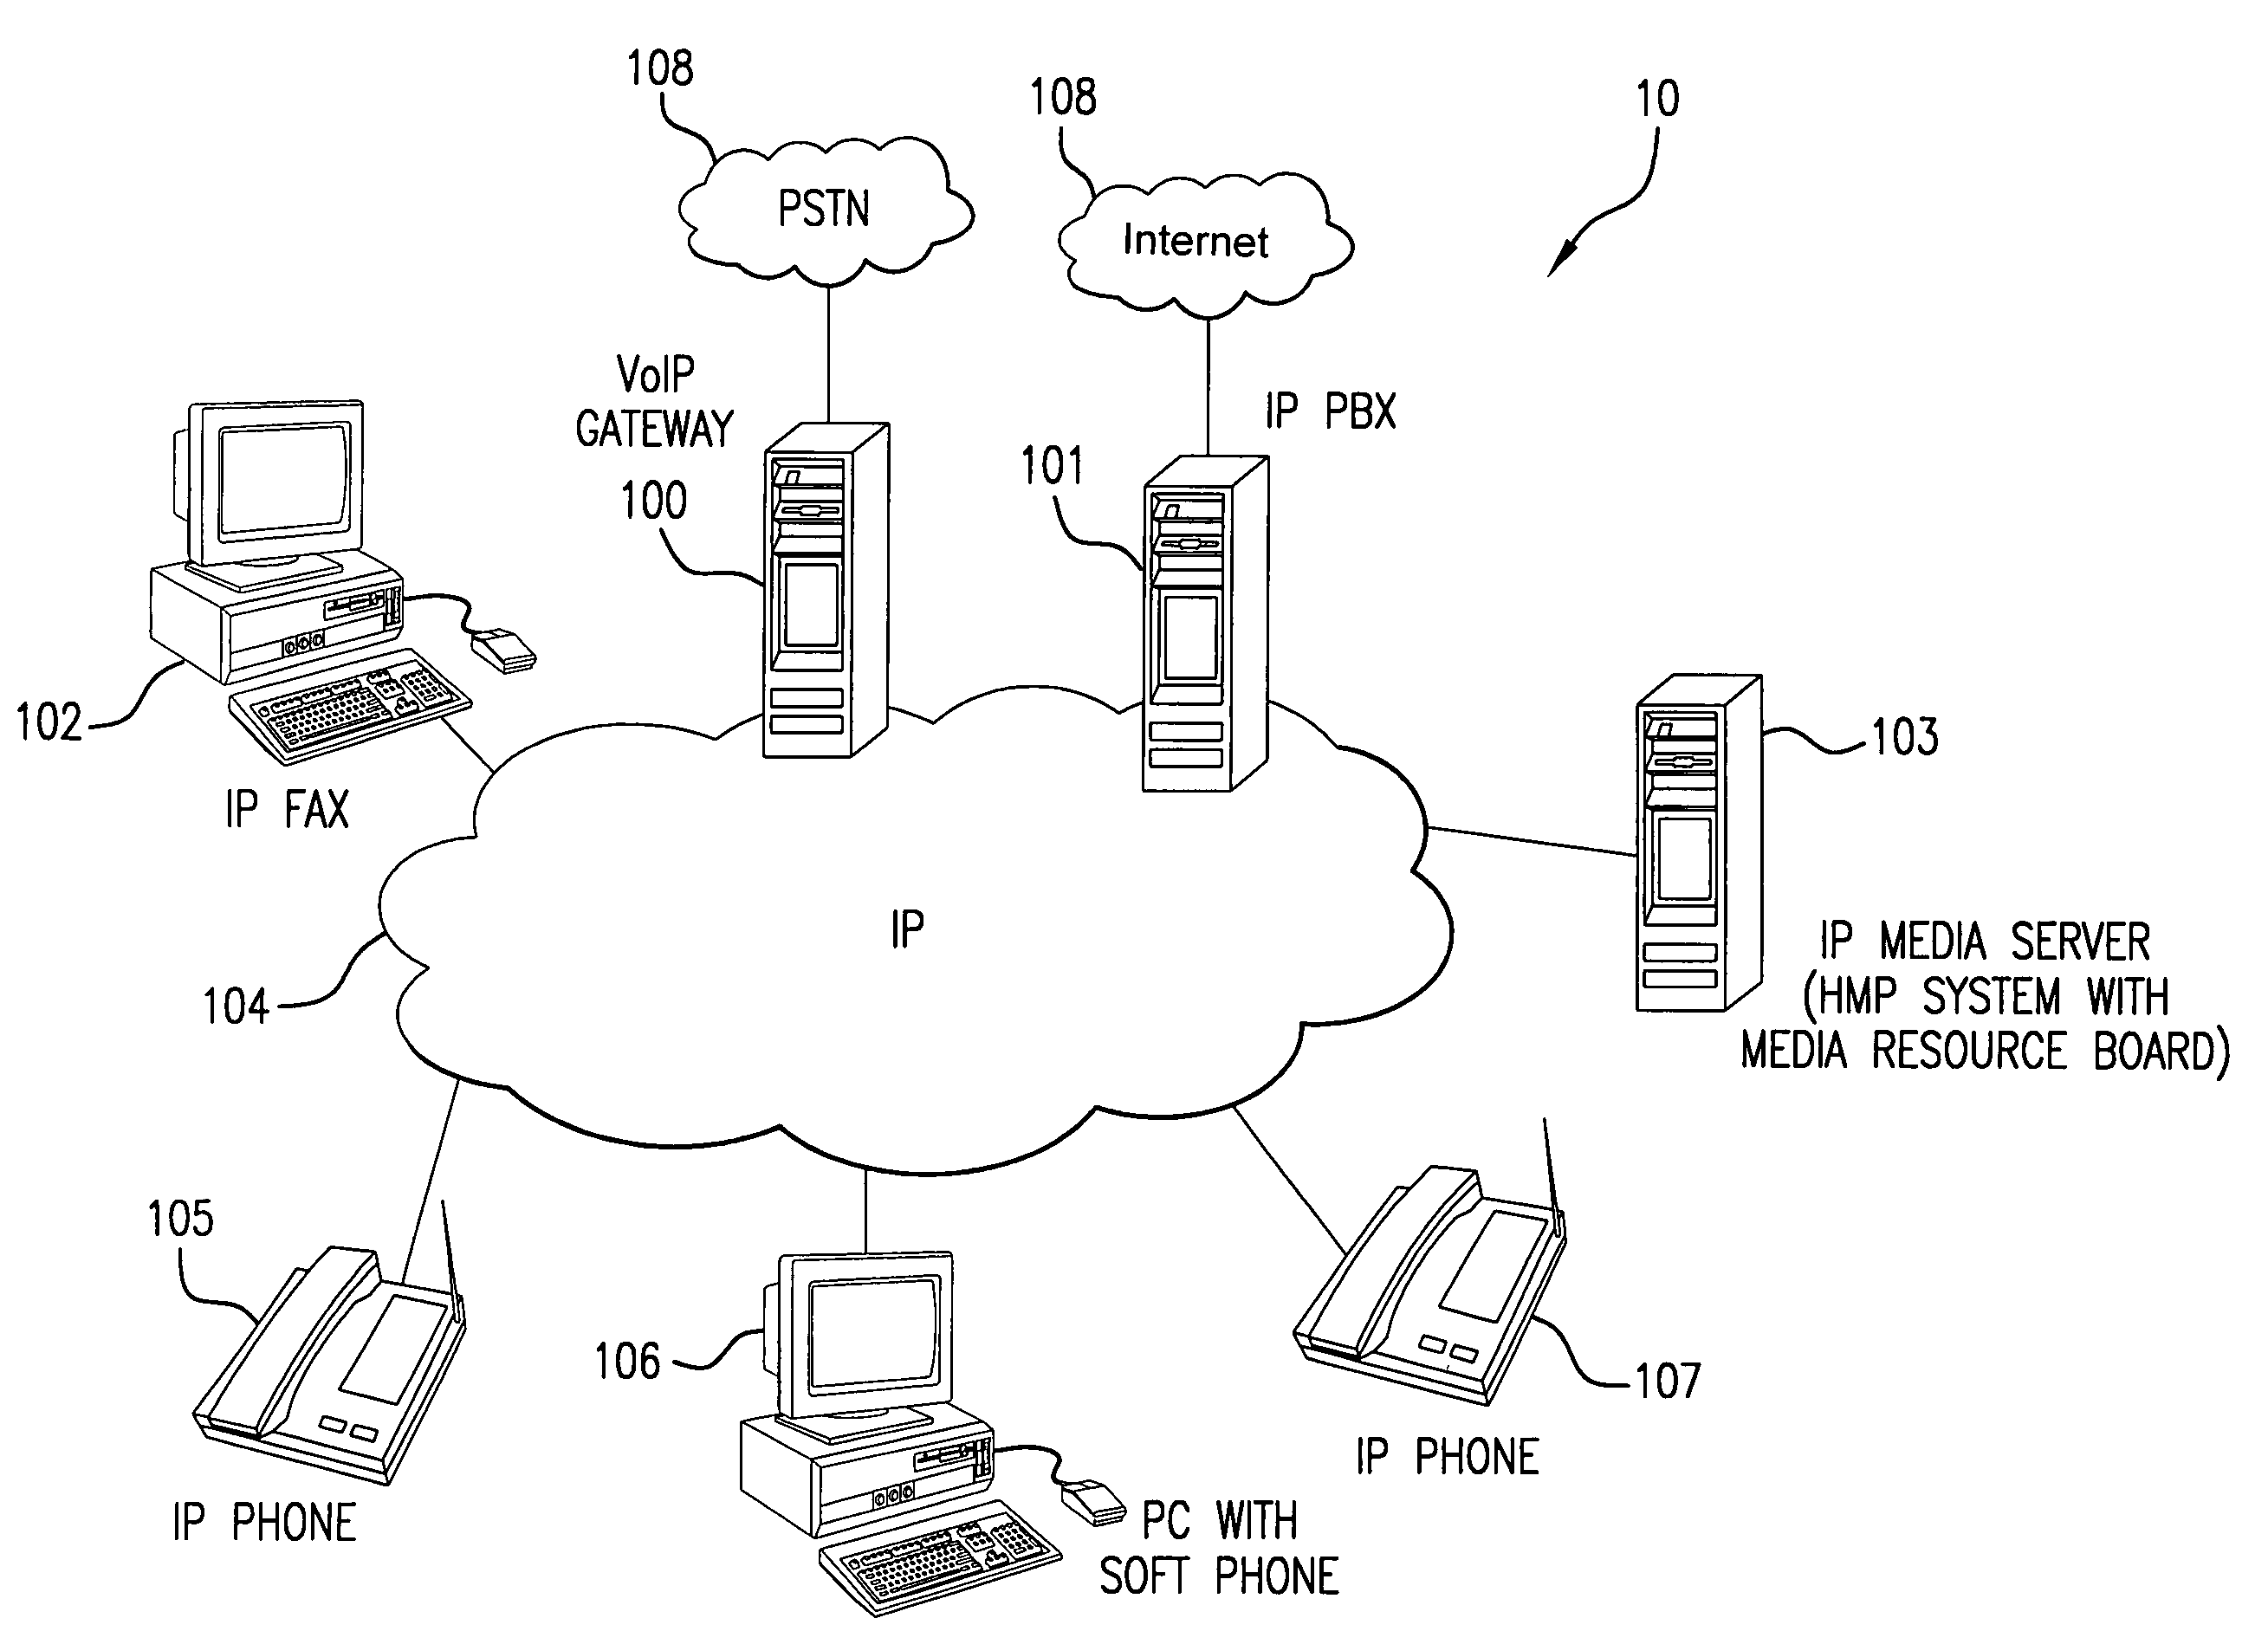 Apparatus and method for allocating media resources